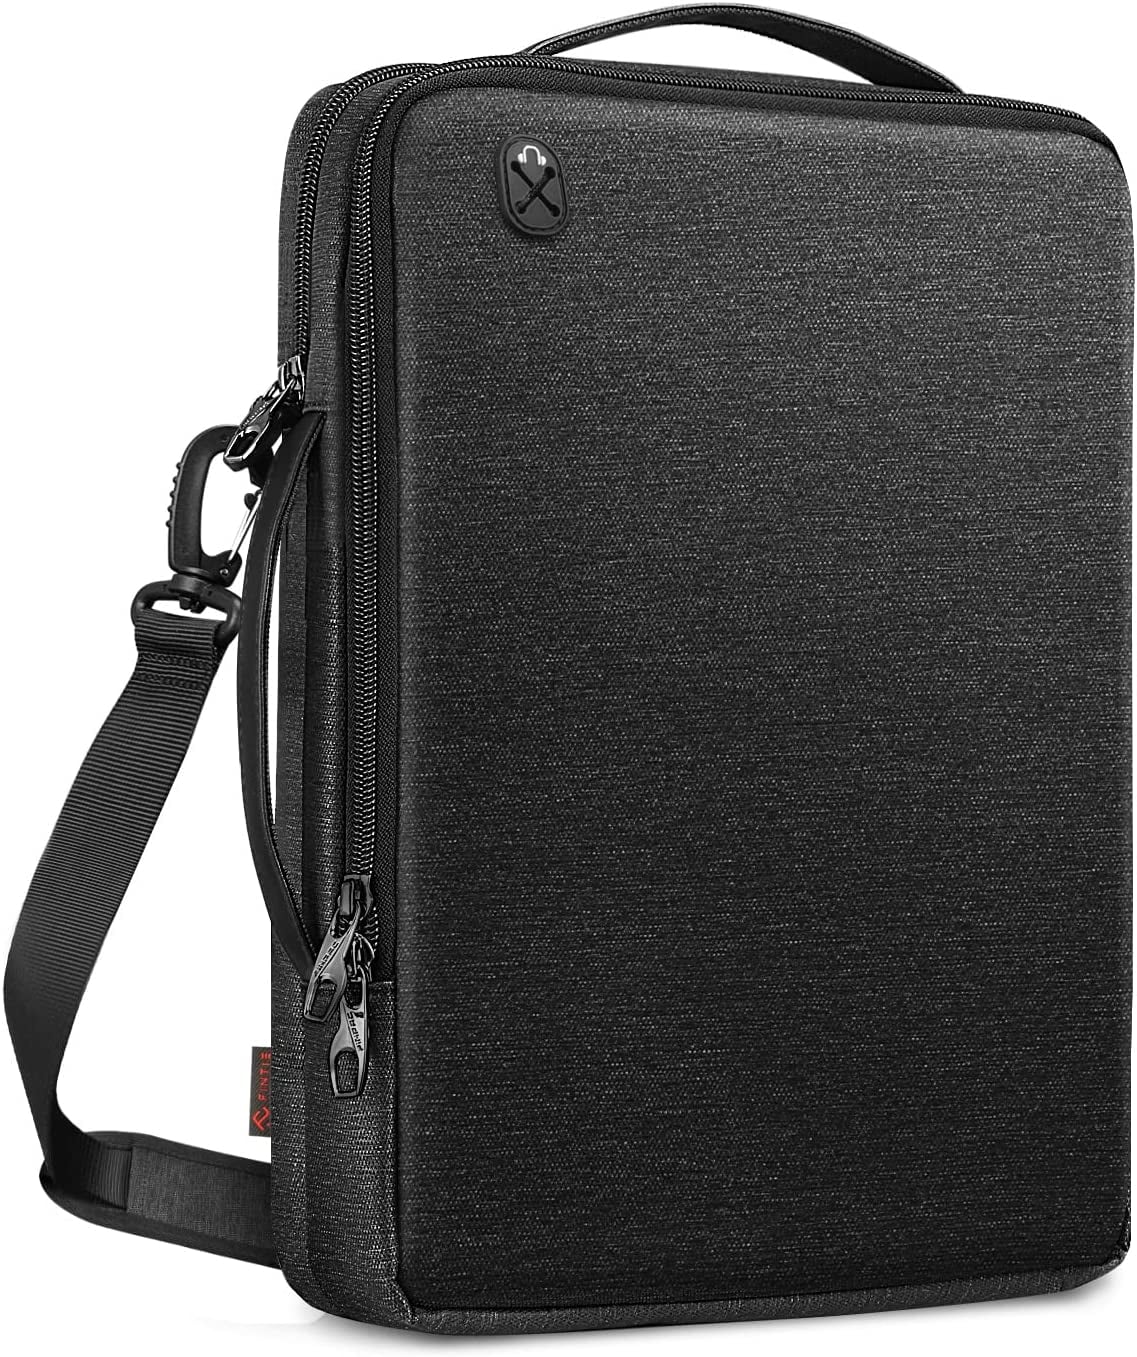 FINPAC 13-inch Laptop Shoulder Bag for MacBook Pro 13 M2 2022-2016, MacBook Air 13 MacBook Pro 14 2021, Computer Carry Case with Pockets for Tablets and Accessories, Surface, HP-Black - Walmart.com